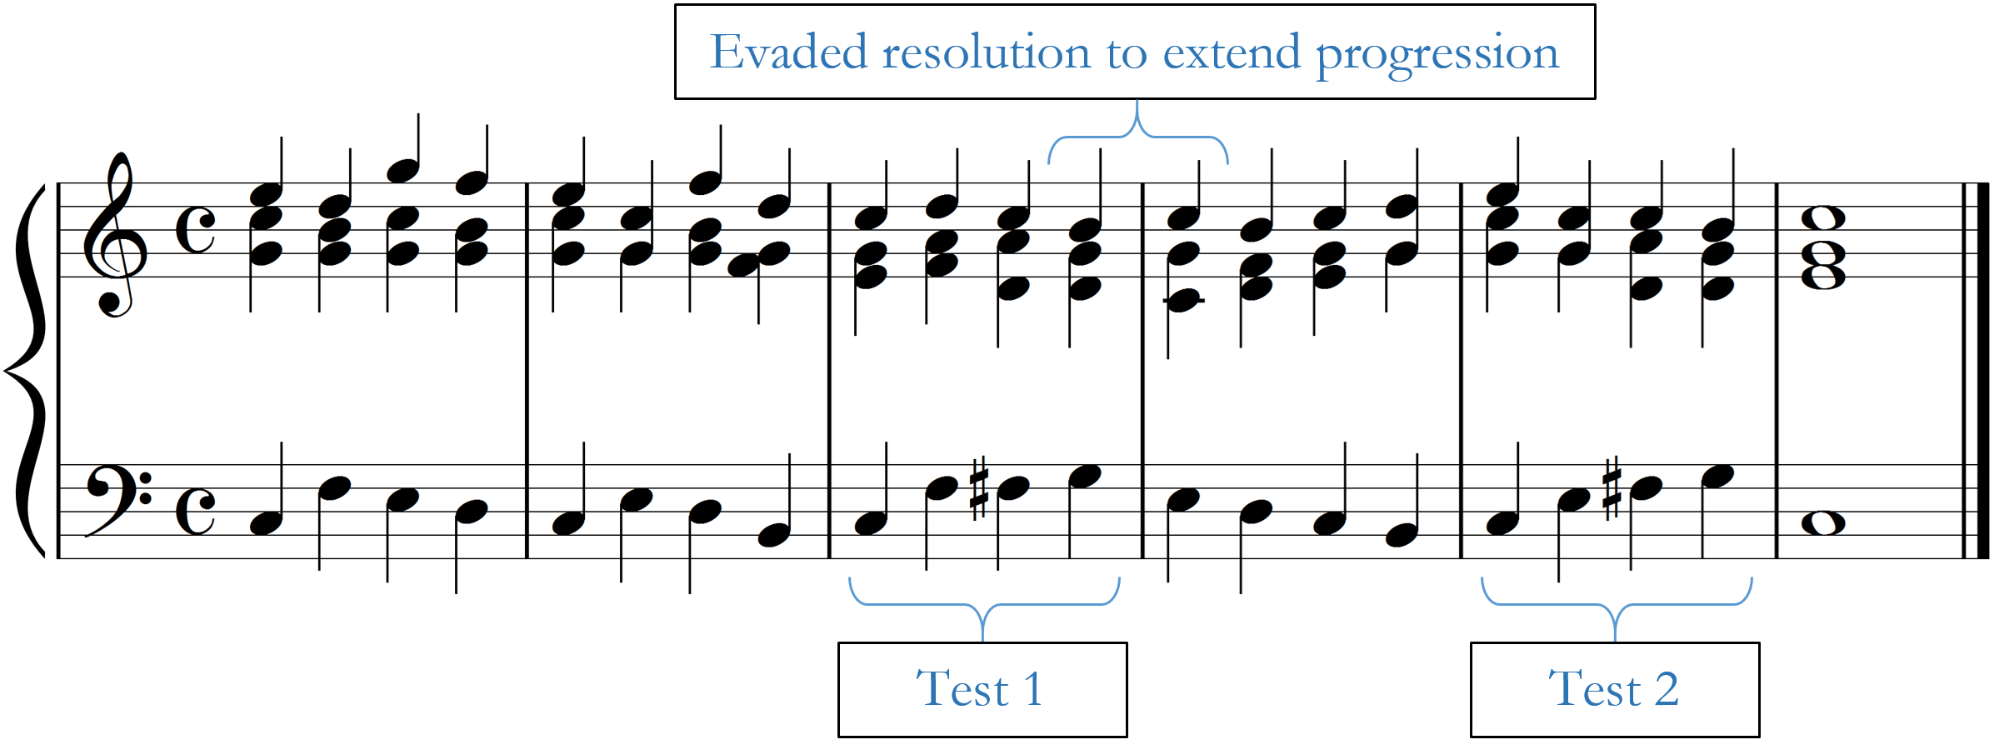 Four-measure, chorale-style progression that tests the problem progression in a new context and illustrates an evaded resolution.